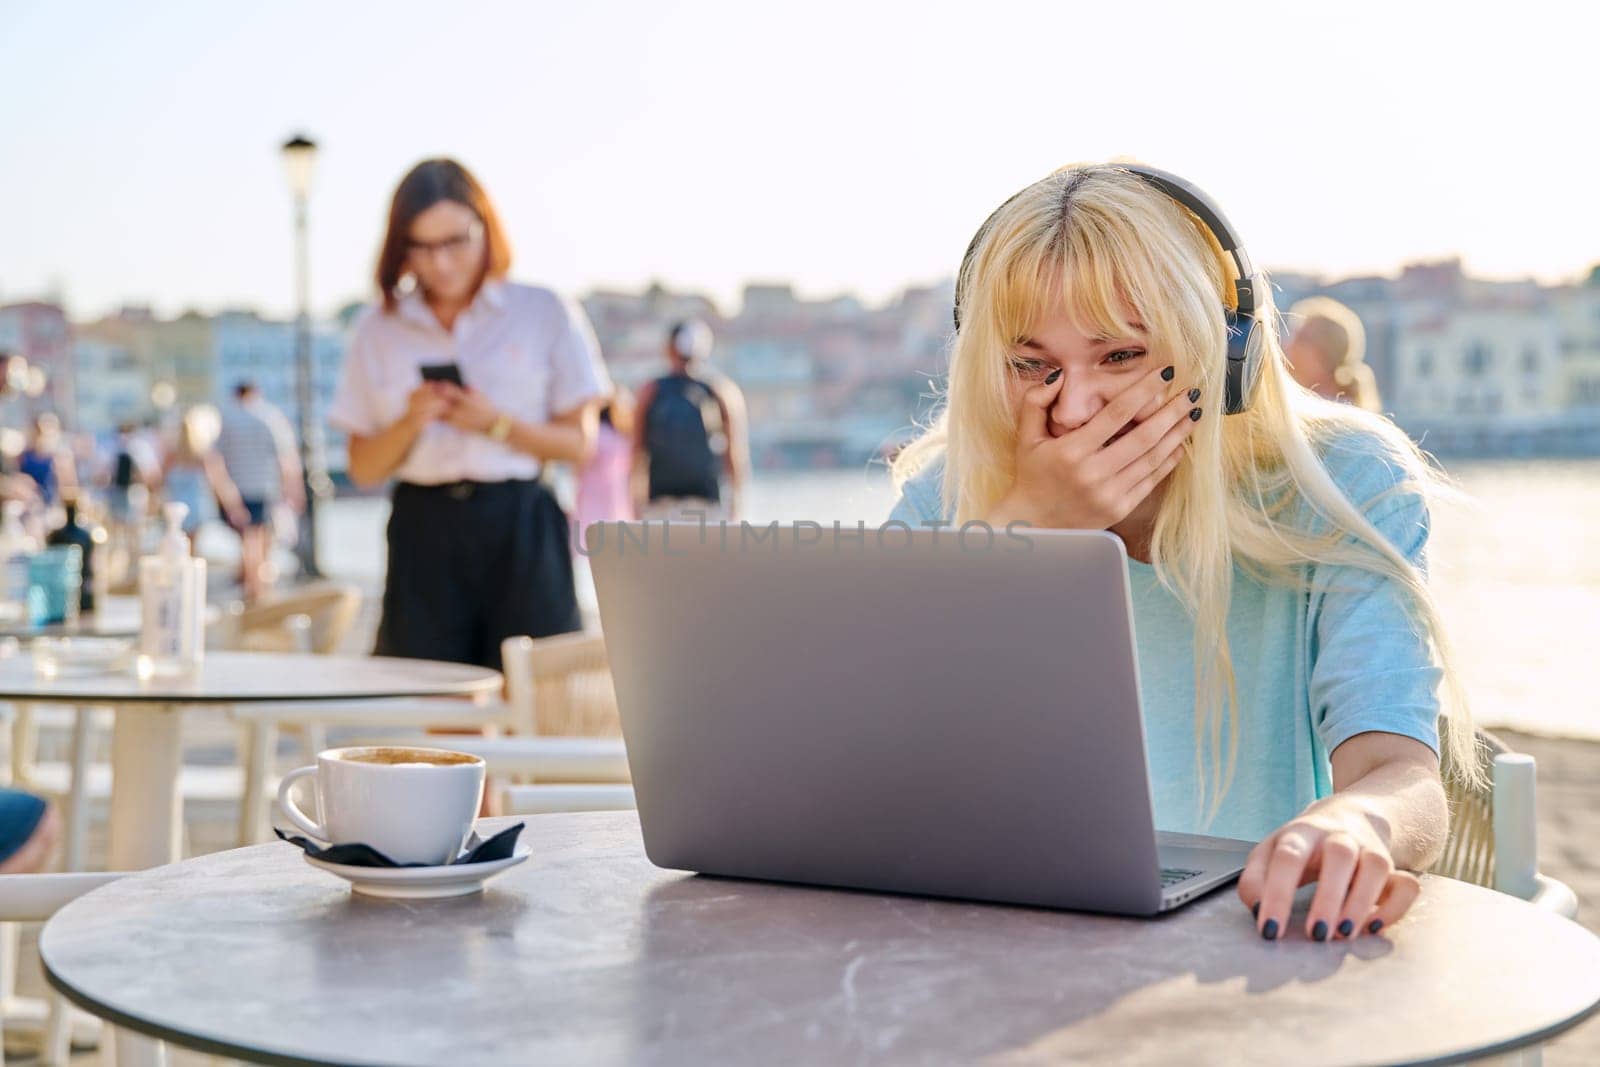 Surprised teenage female with headphones looking at a laptop in an outdoor cafe. Beautiful emotional young blonde on a summer day at a table with a cup of coffee on the seaside promenade.